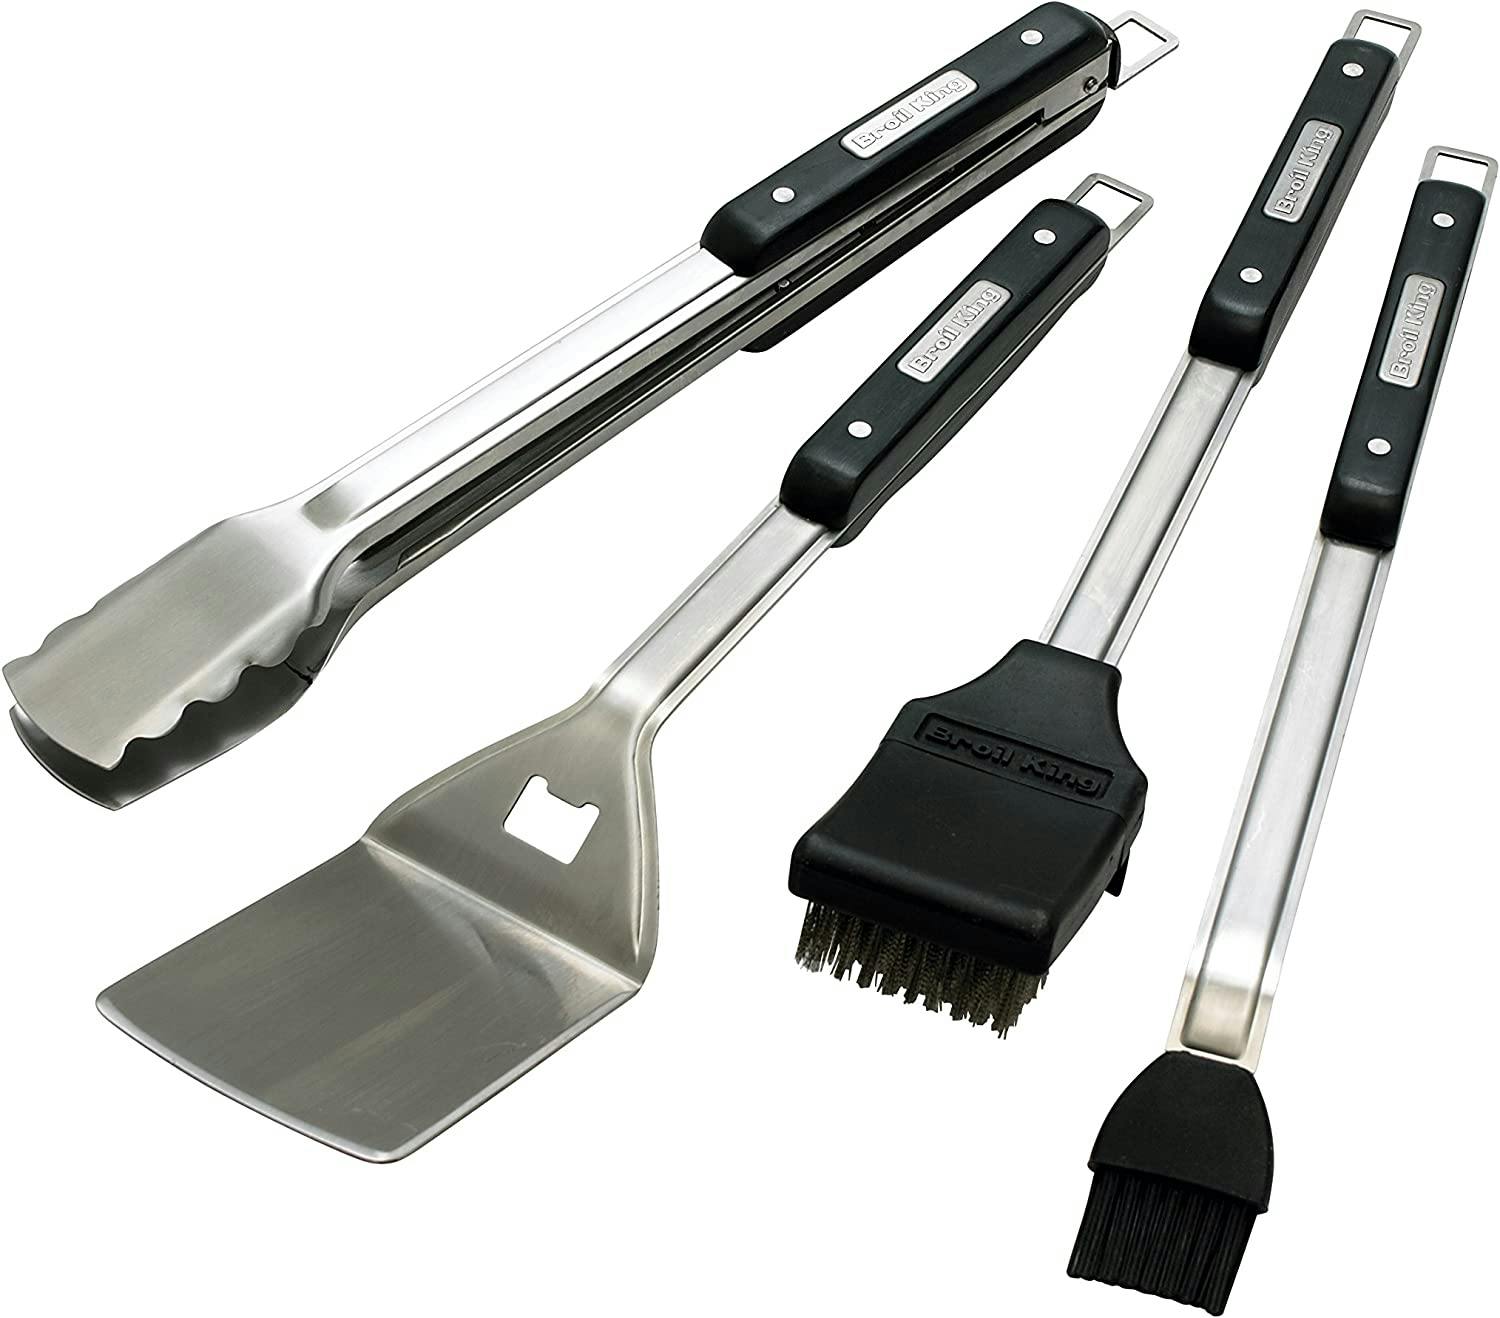 Broil King Imperial 4-Piece Stainless Steel BBQ Tool Set